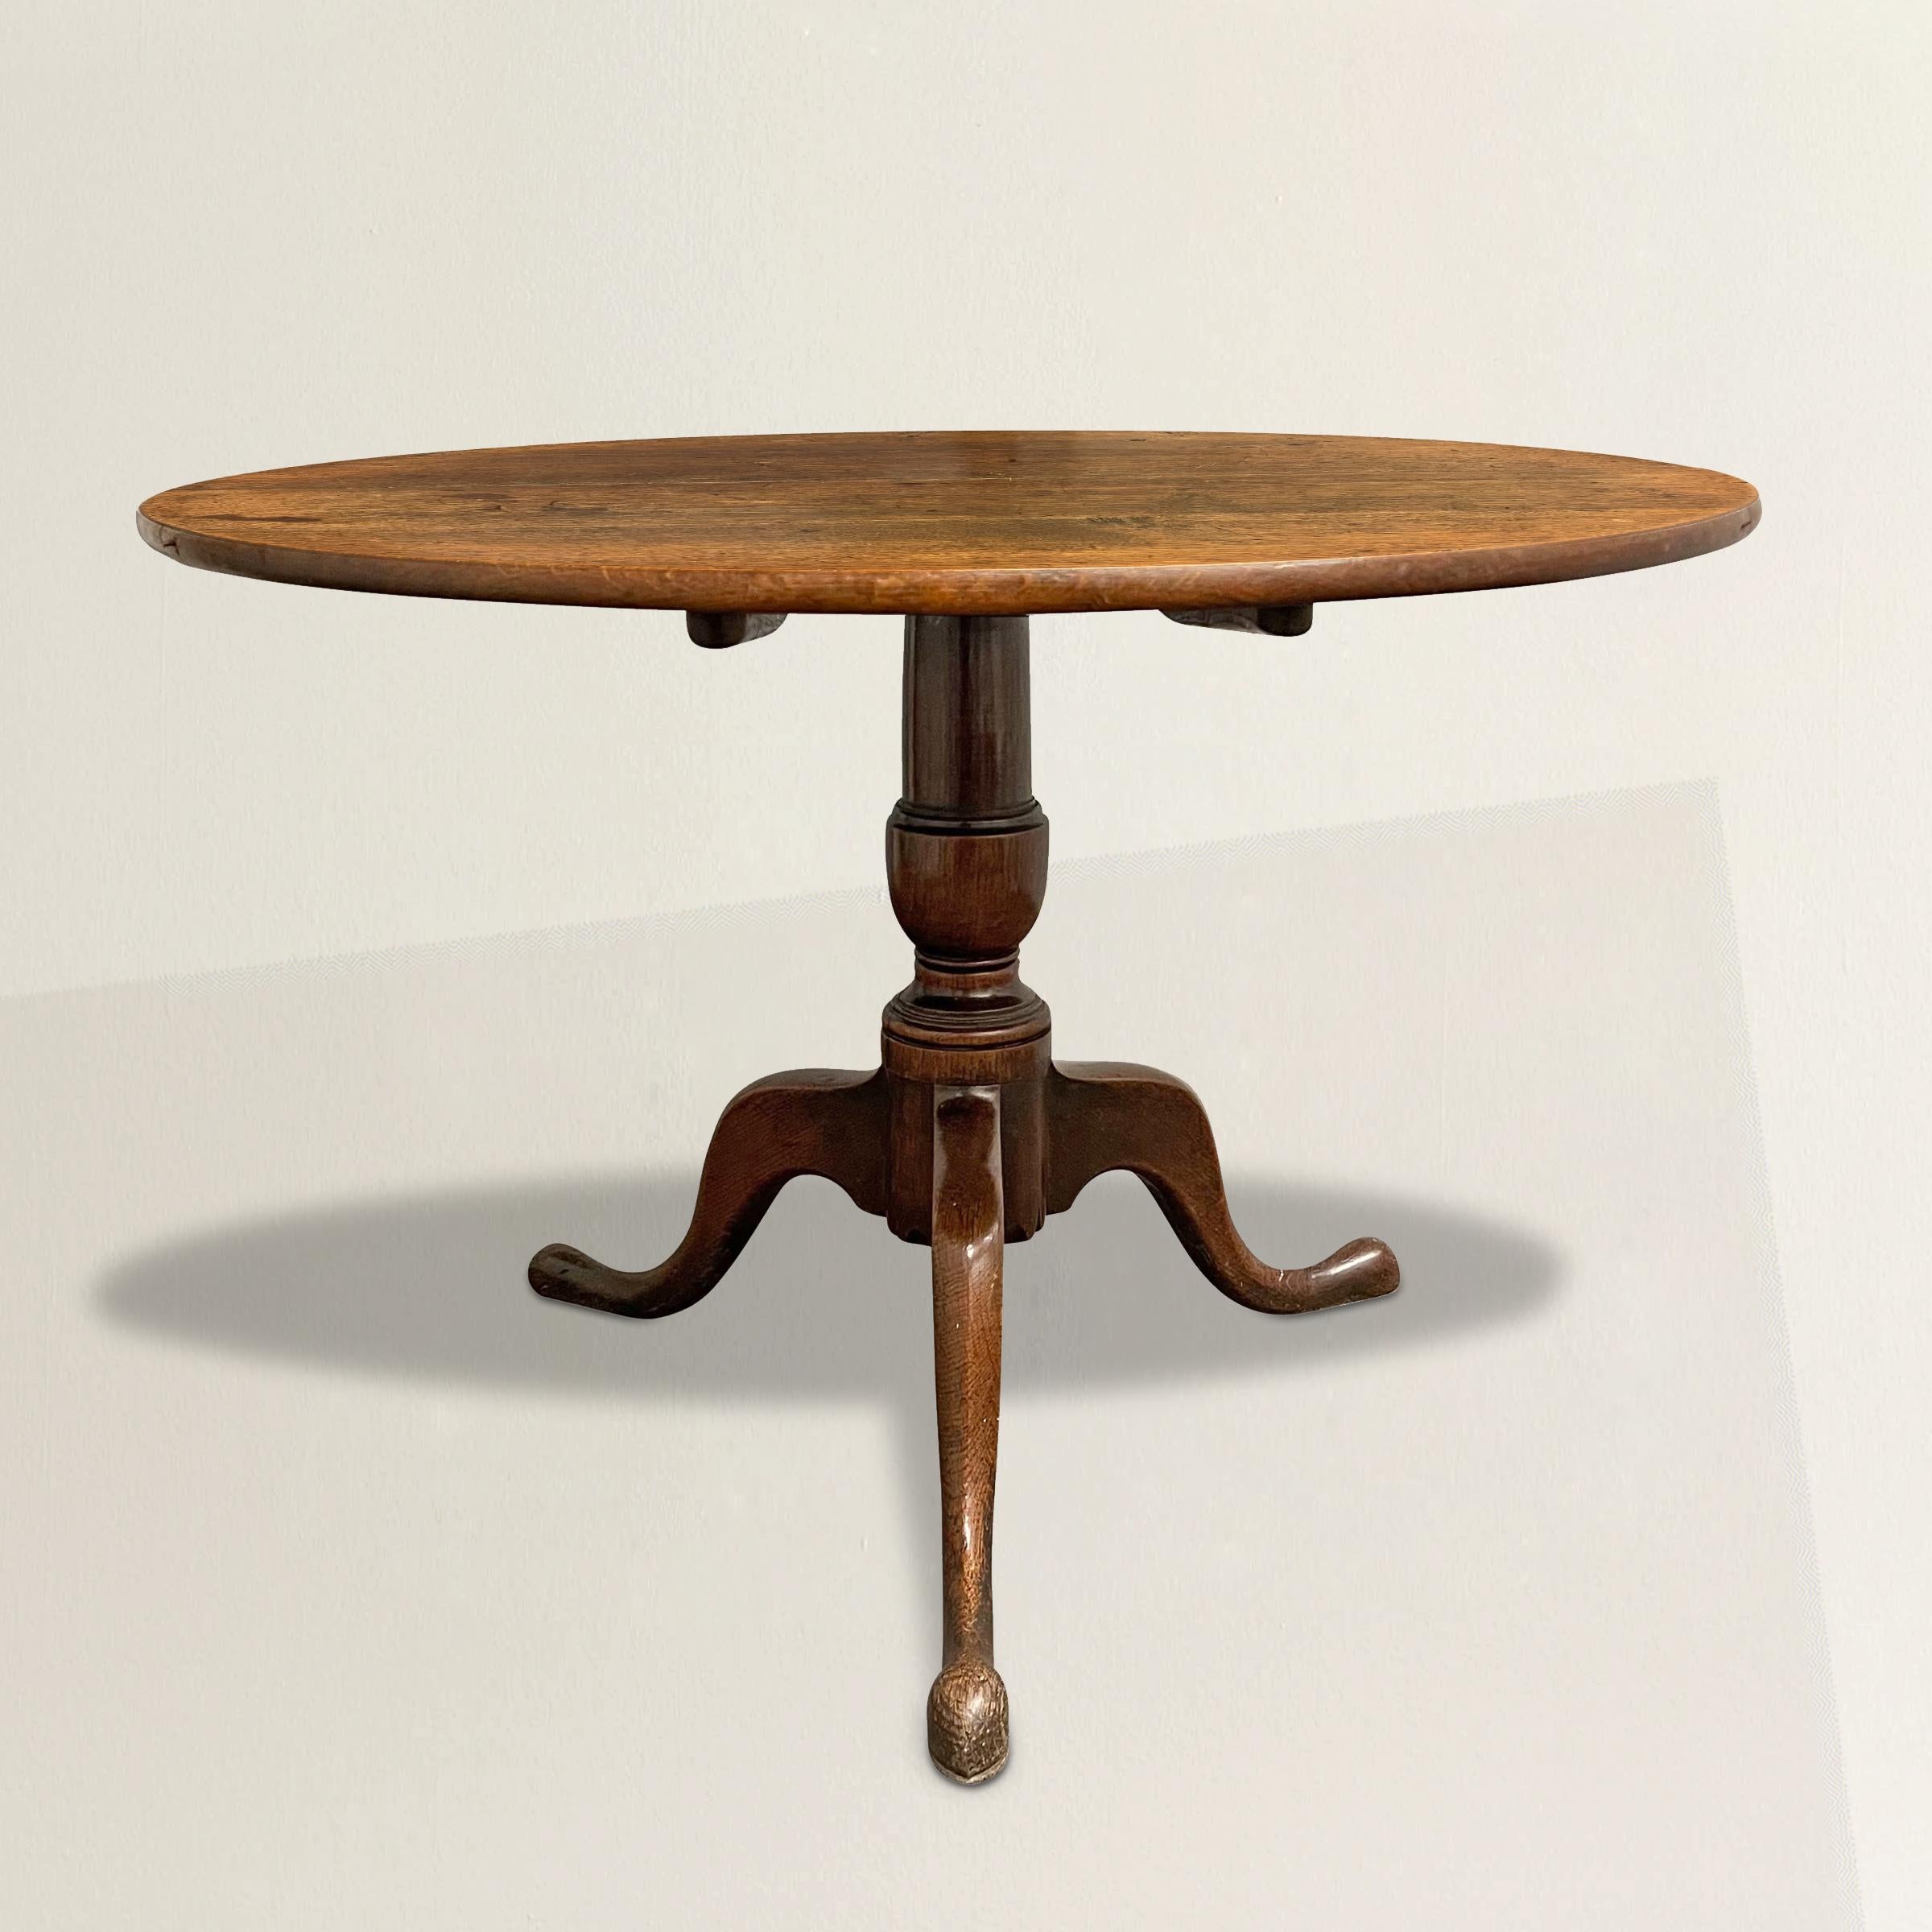 This 18th century English Queen Anne oak tilt-top table is a charming relic from a bygone era, originally designed to serve tea or meals on. Its unique feature lies in the tilting mechanism of the top, which allowed the table to be conveniently